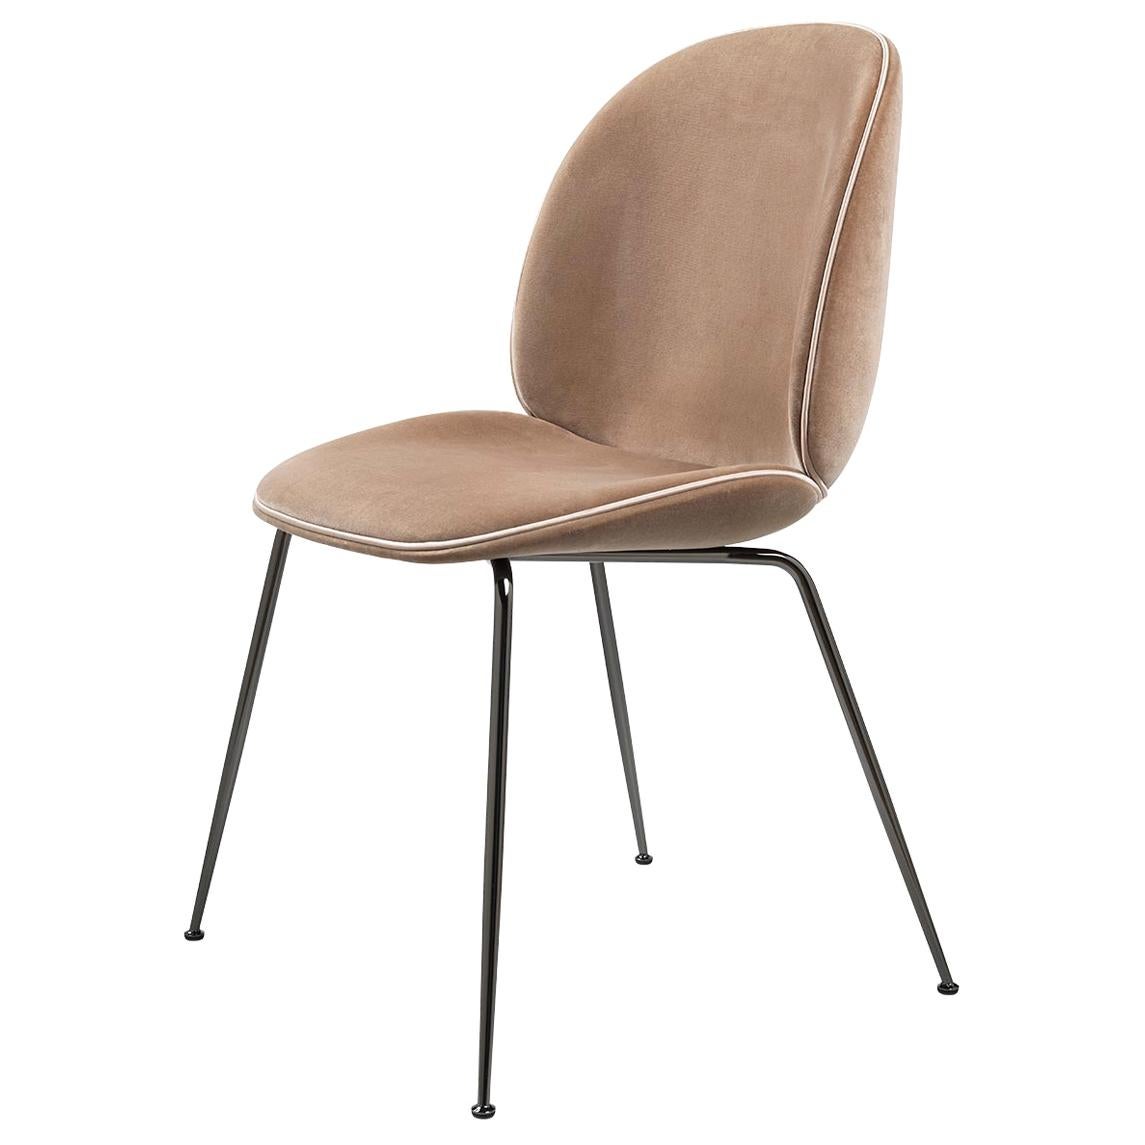 Beetle Dining Chair, Fully Upholstered, Conic Base, Black Chrome